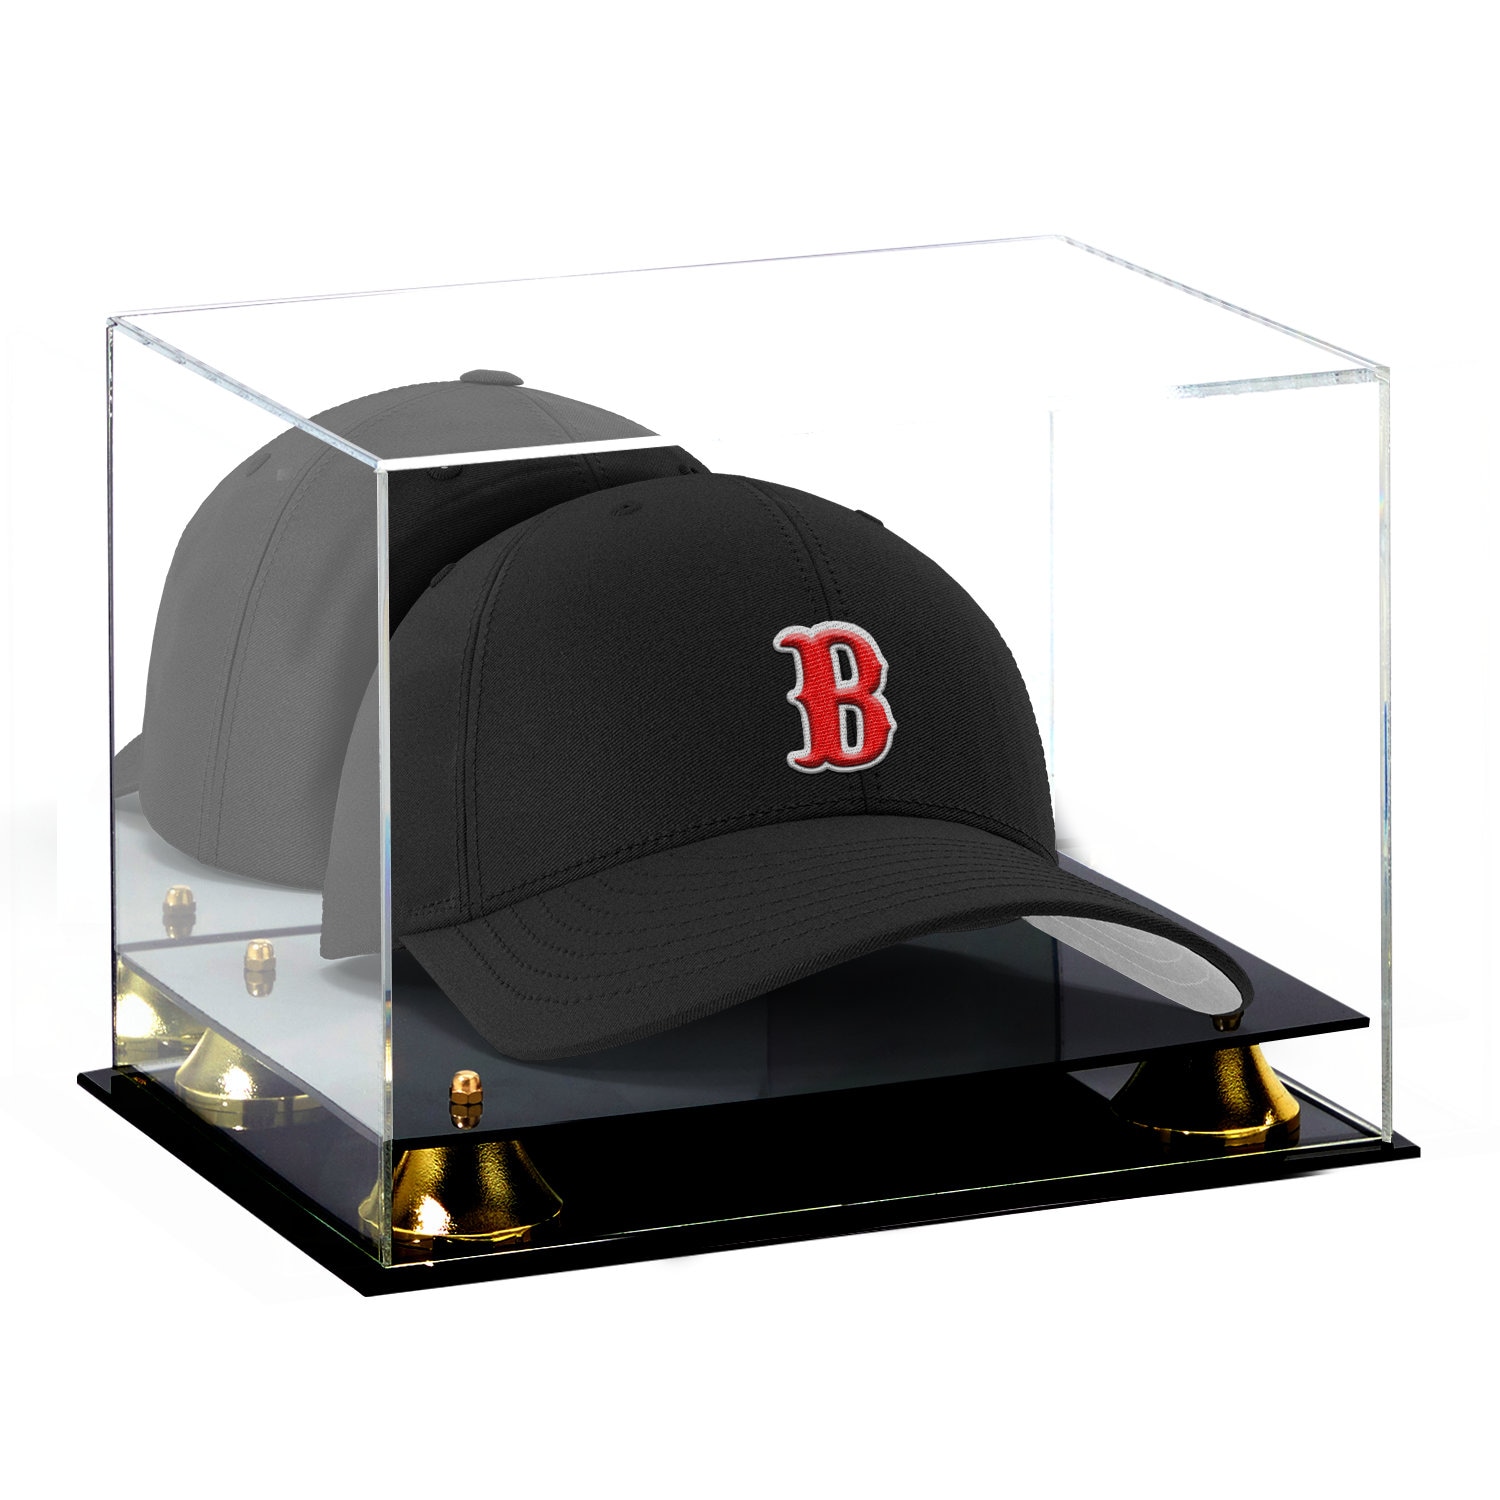 Better Display Cases Acrylic Cowboy Hat Display Case with Clear Case, Red Risers and Black Base - 16 x 13 x 12 (V61B/A024-B)